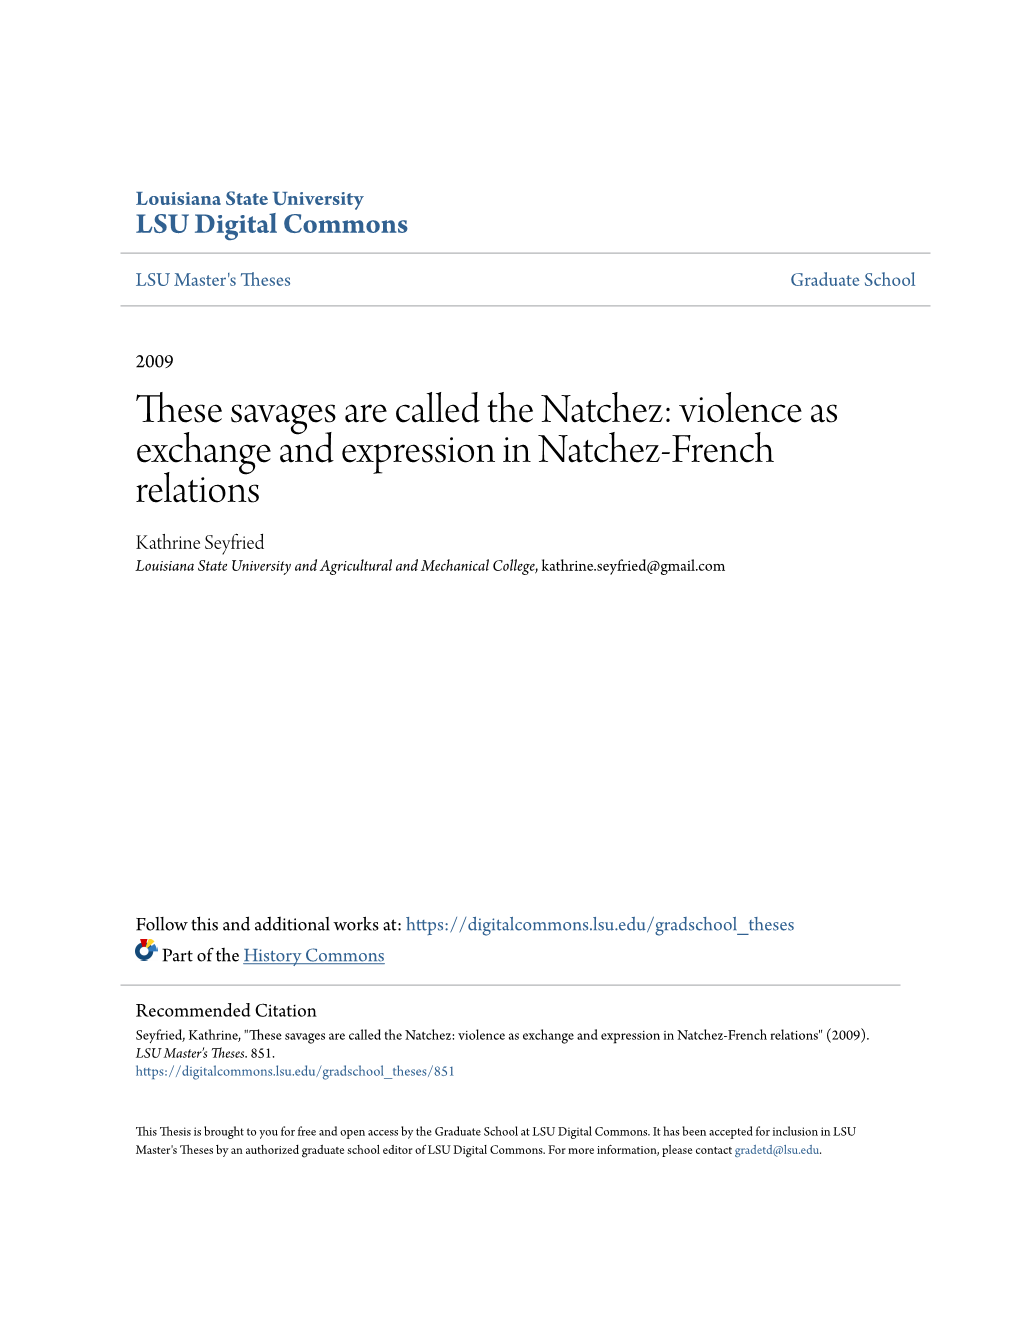 These Savages Are Called the Natchez: Violence As Exchange and Expression in Natchez-French Relations" (2009)